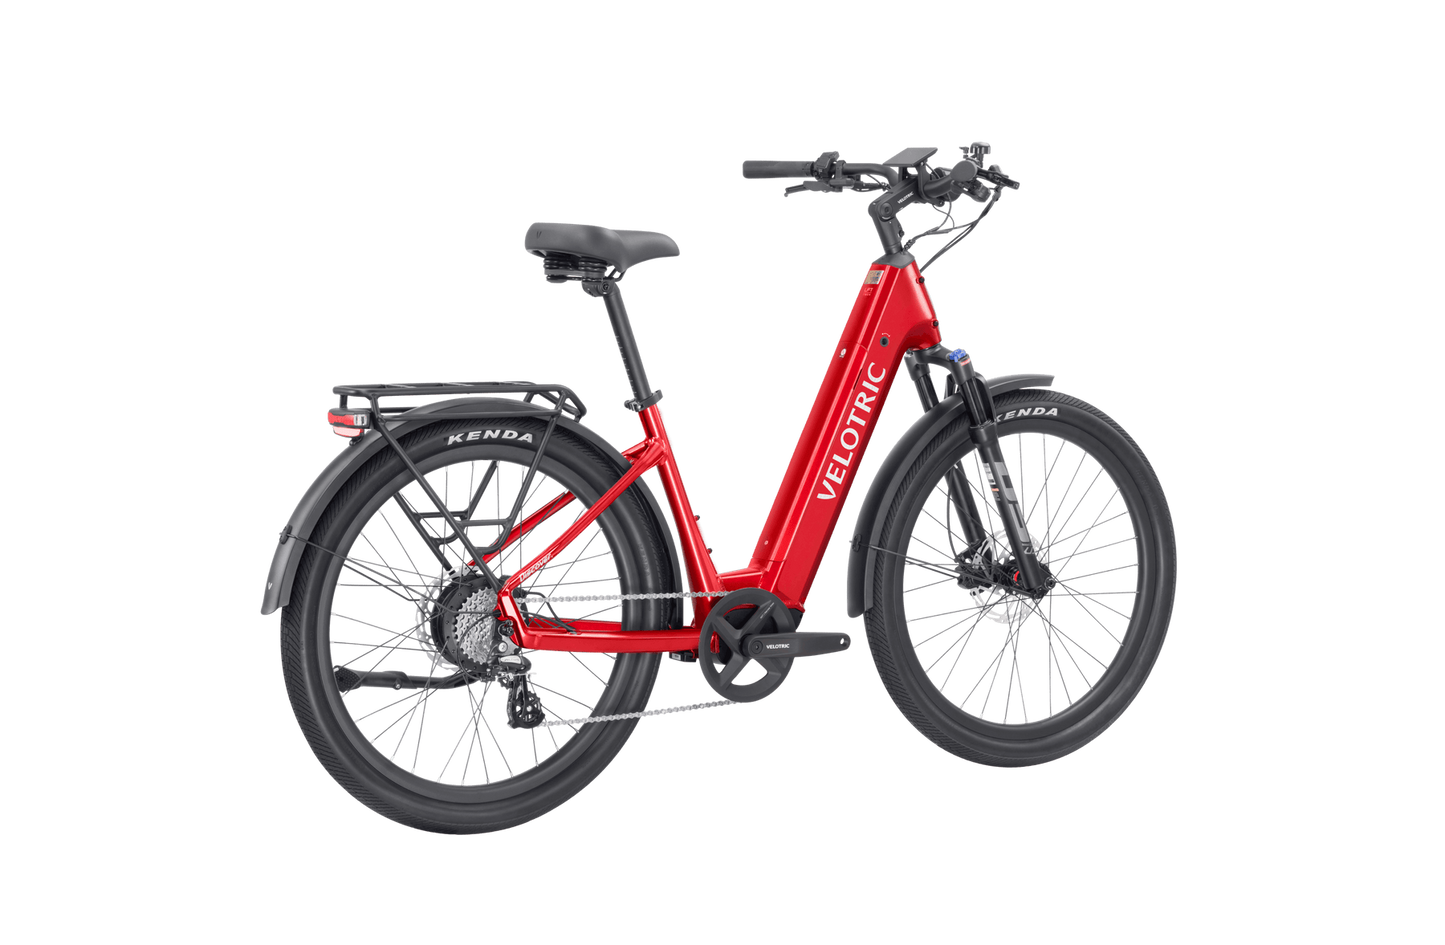 Red Velotric Discover 2 electric bicycle with black trim and thick tires against a black background.